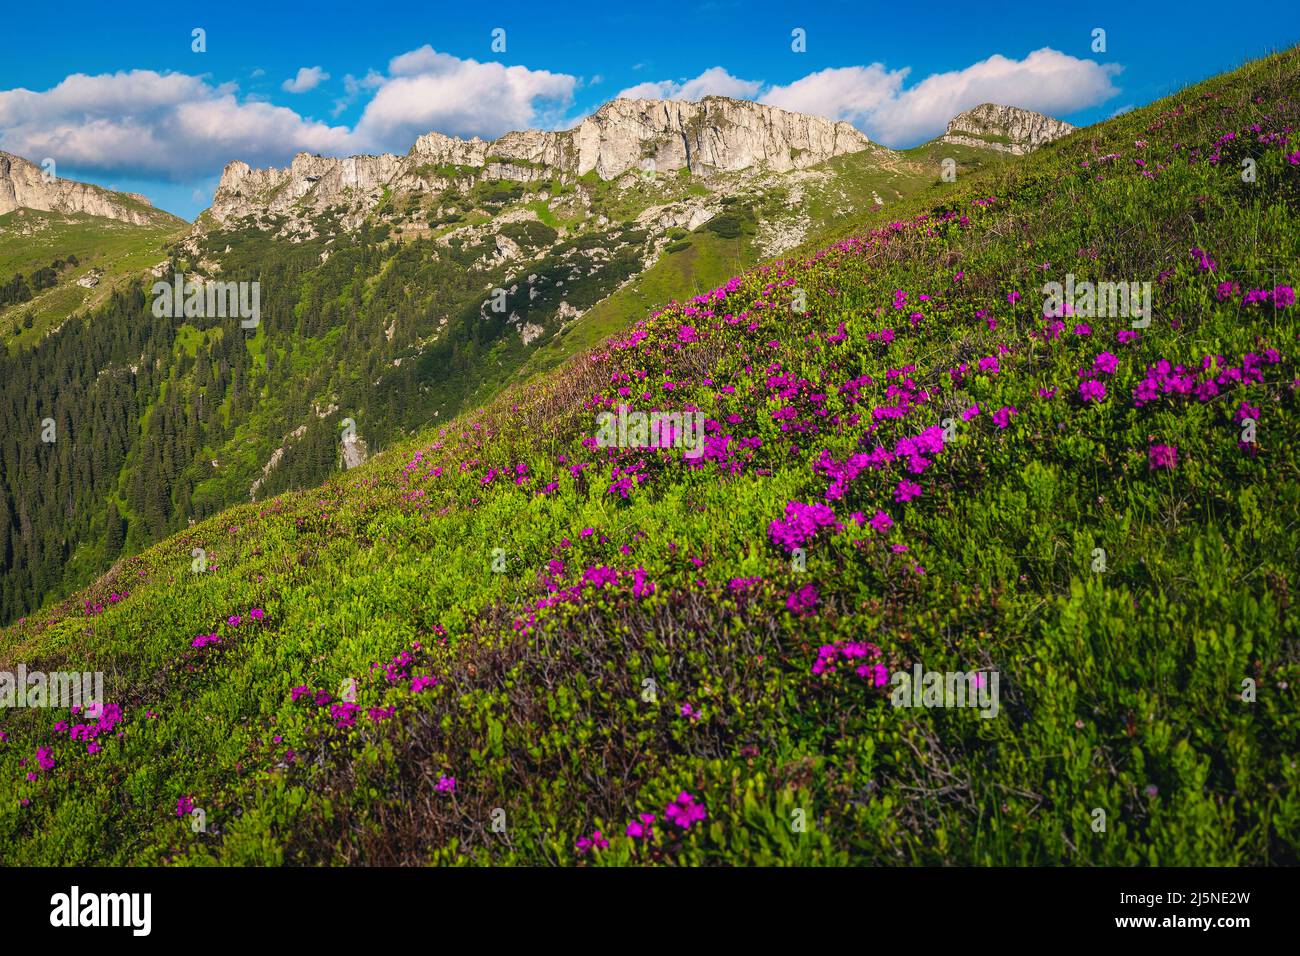 Blossoming pink rhododendron flowers on the hills and majestic alpine summer landscape, Bucegi mountains, Carpathians, Romania, Europe Stock Photo